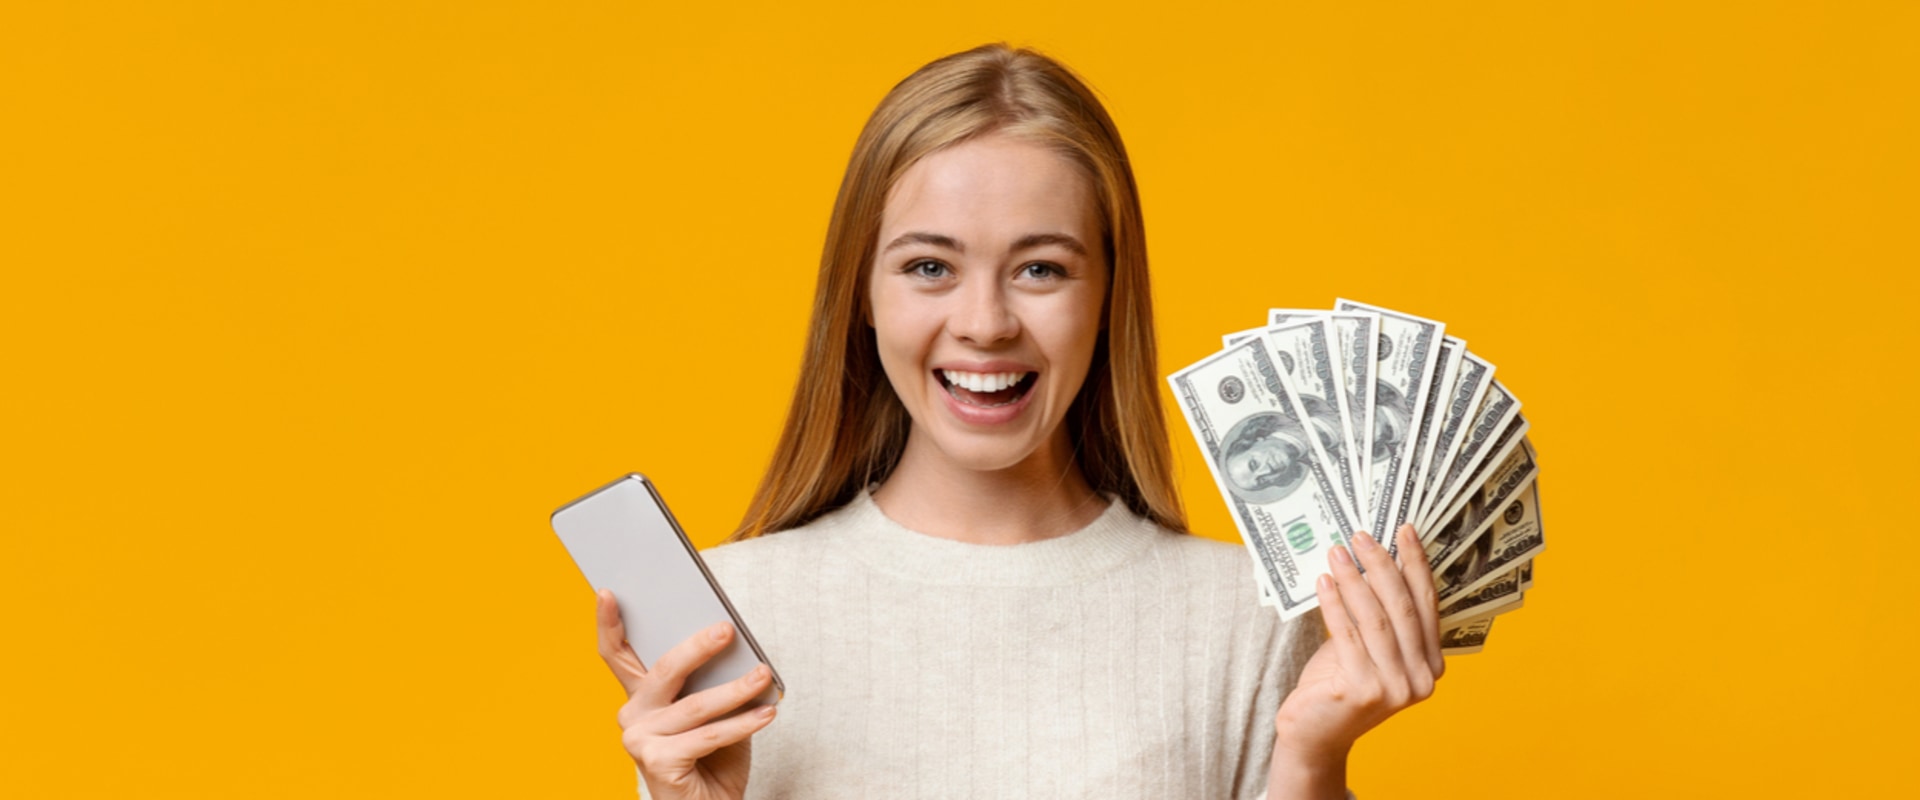 Instant Cash Advance Apps: Dave and Beyond